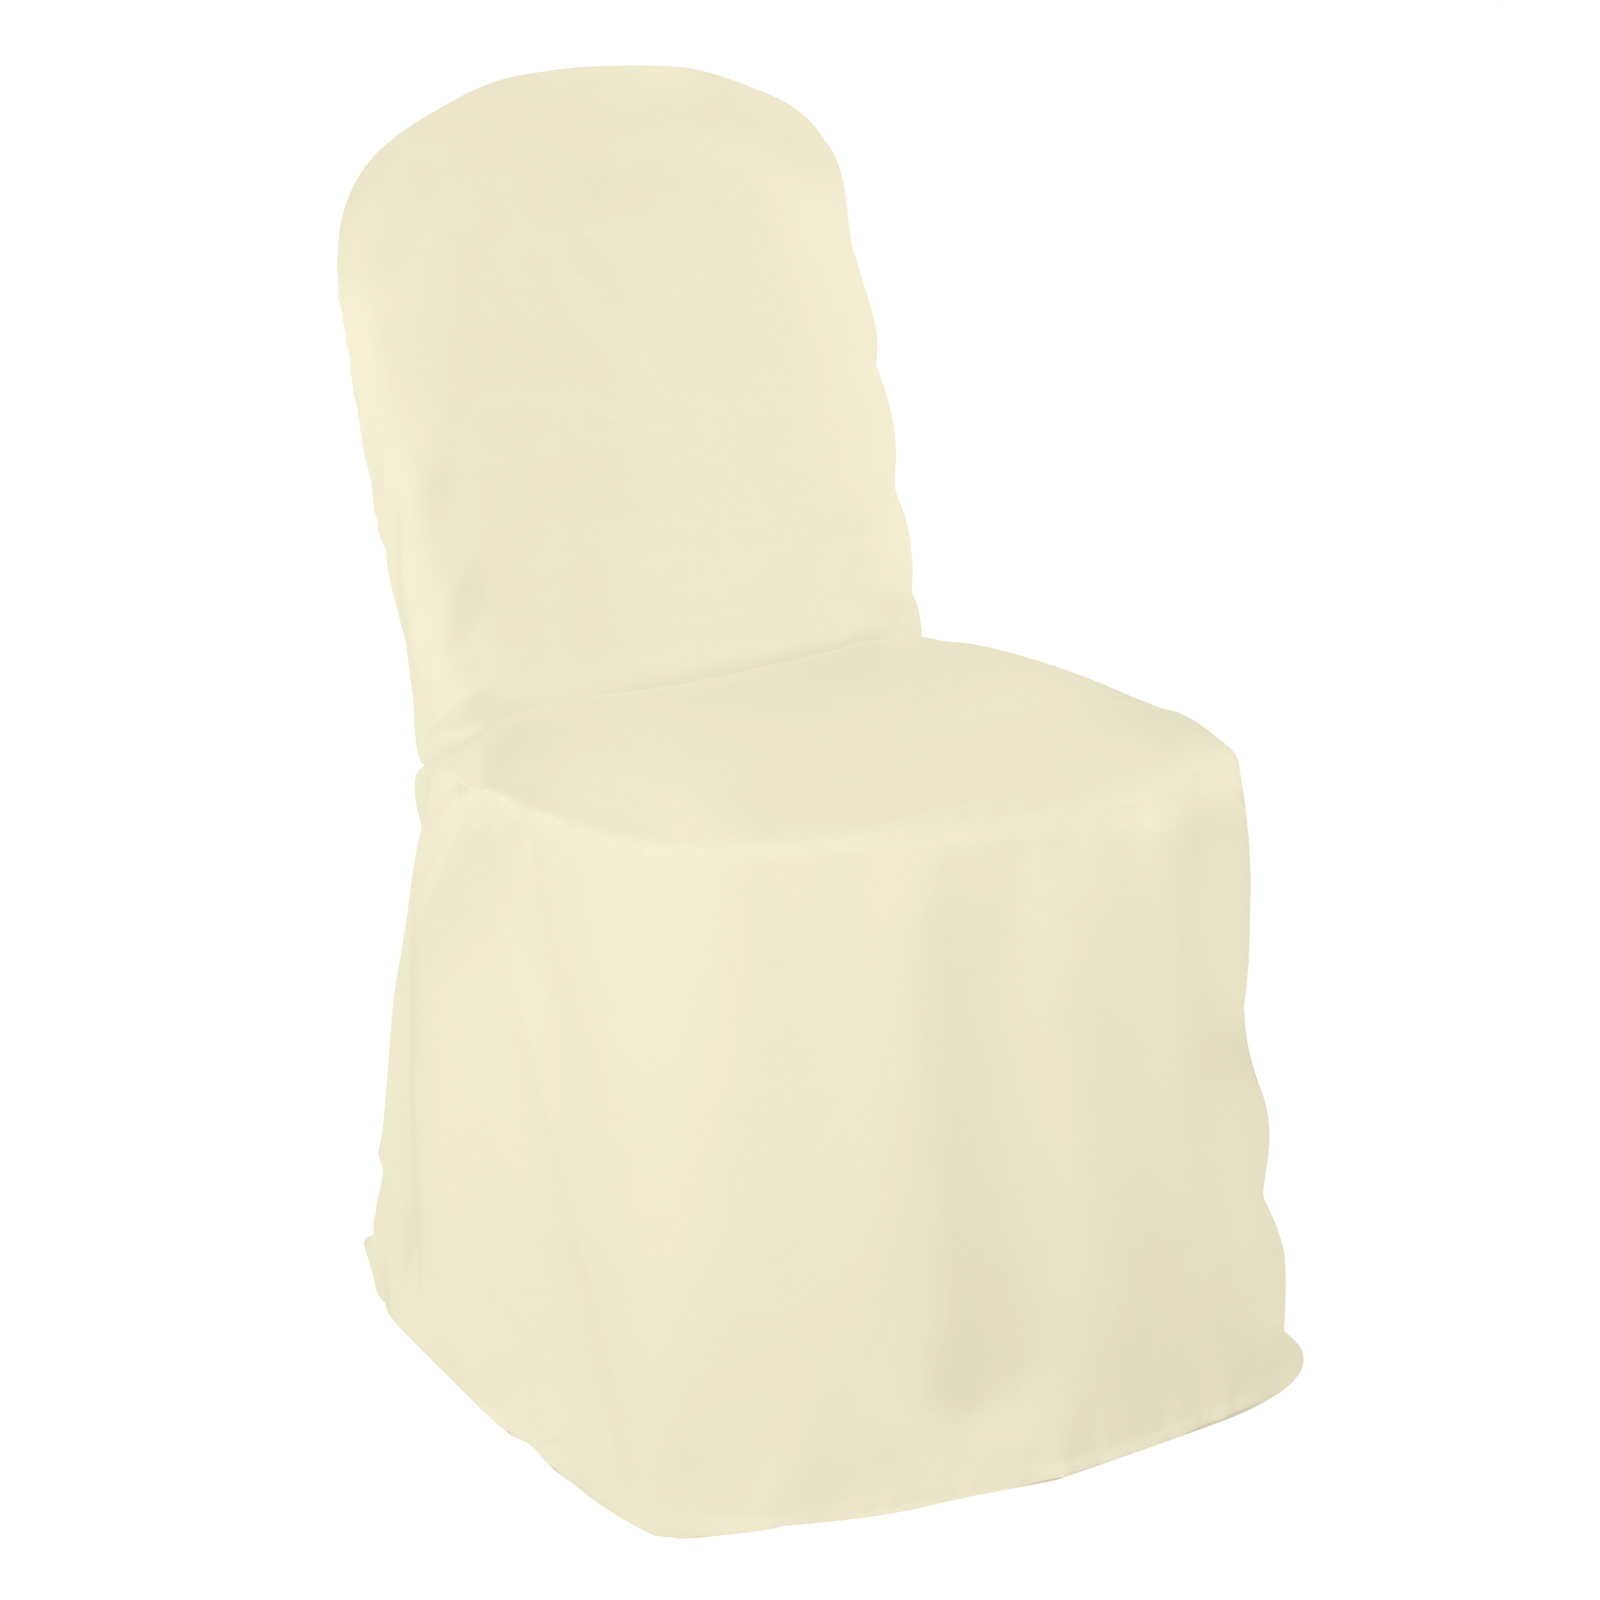 Premium Polyester Banquet Chair Cover - for Wedding or Party Use - Ivory - 100pcs